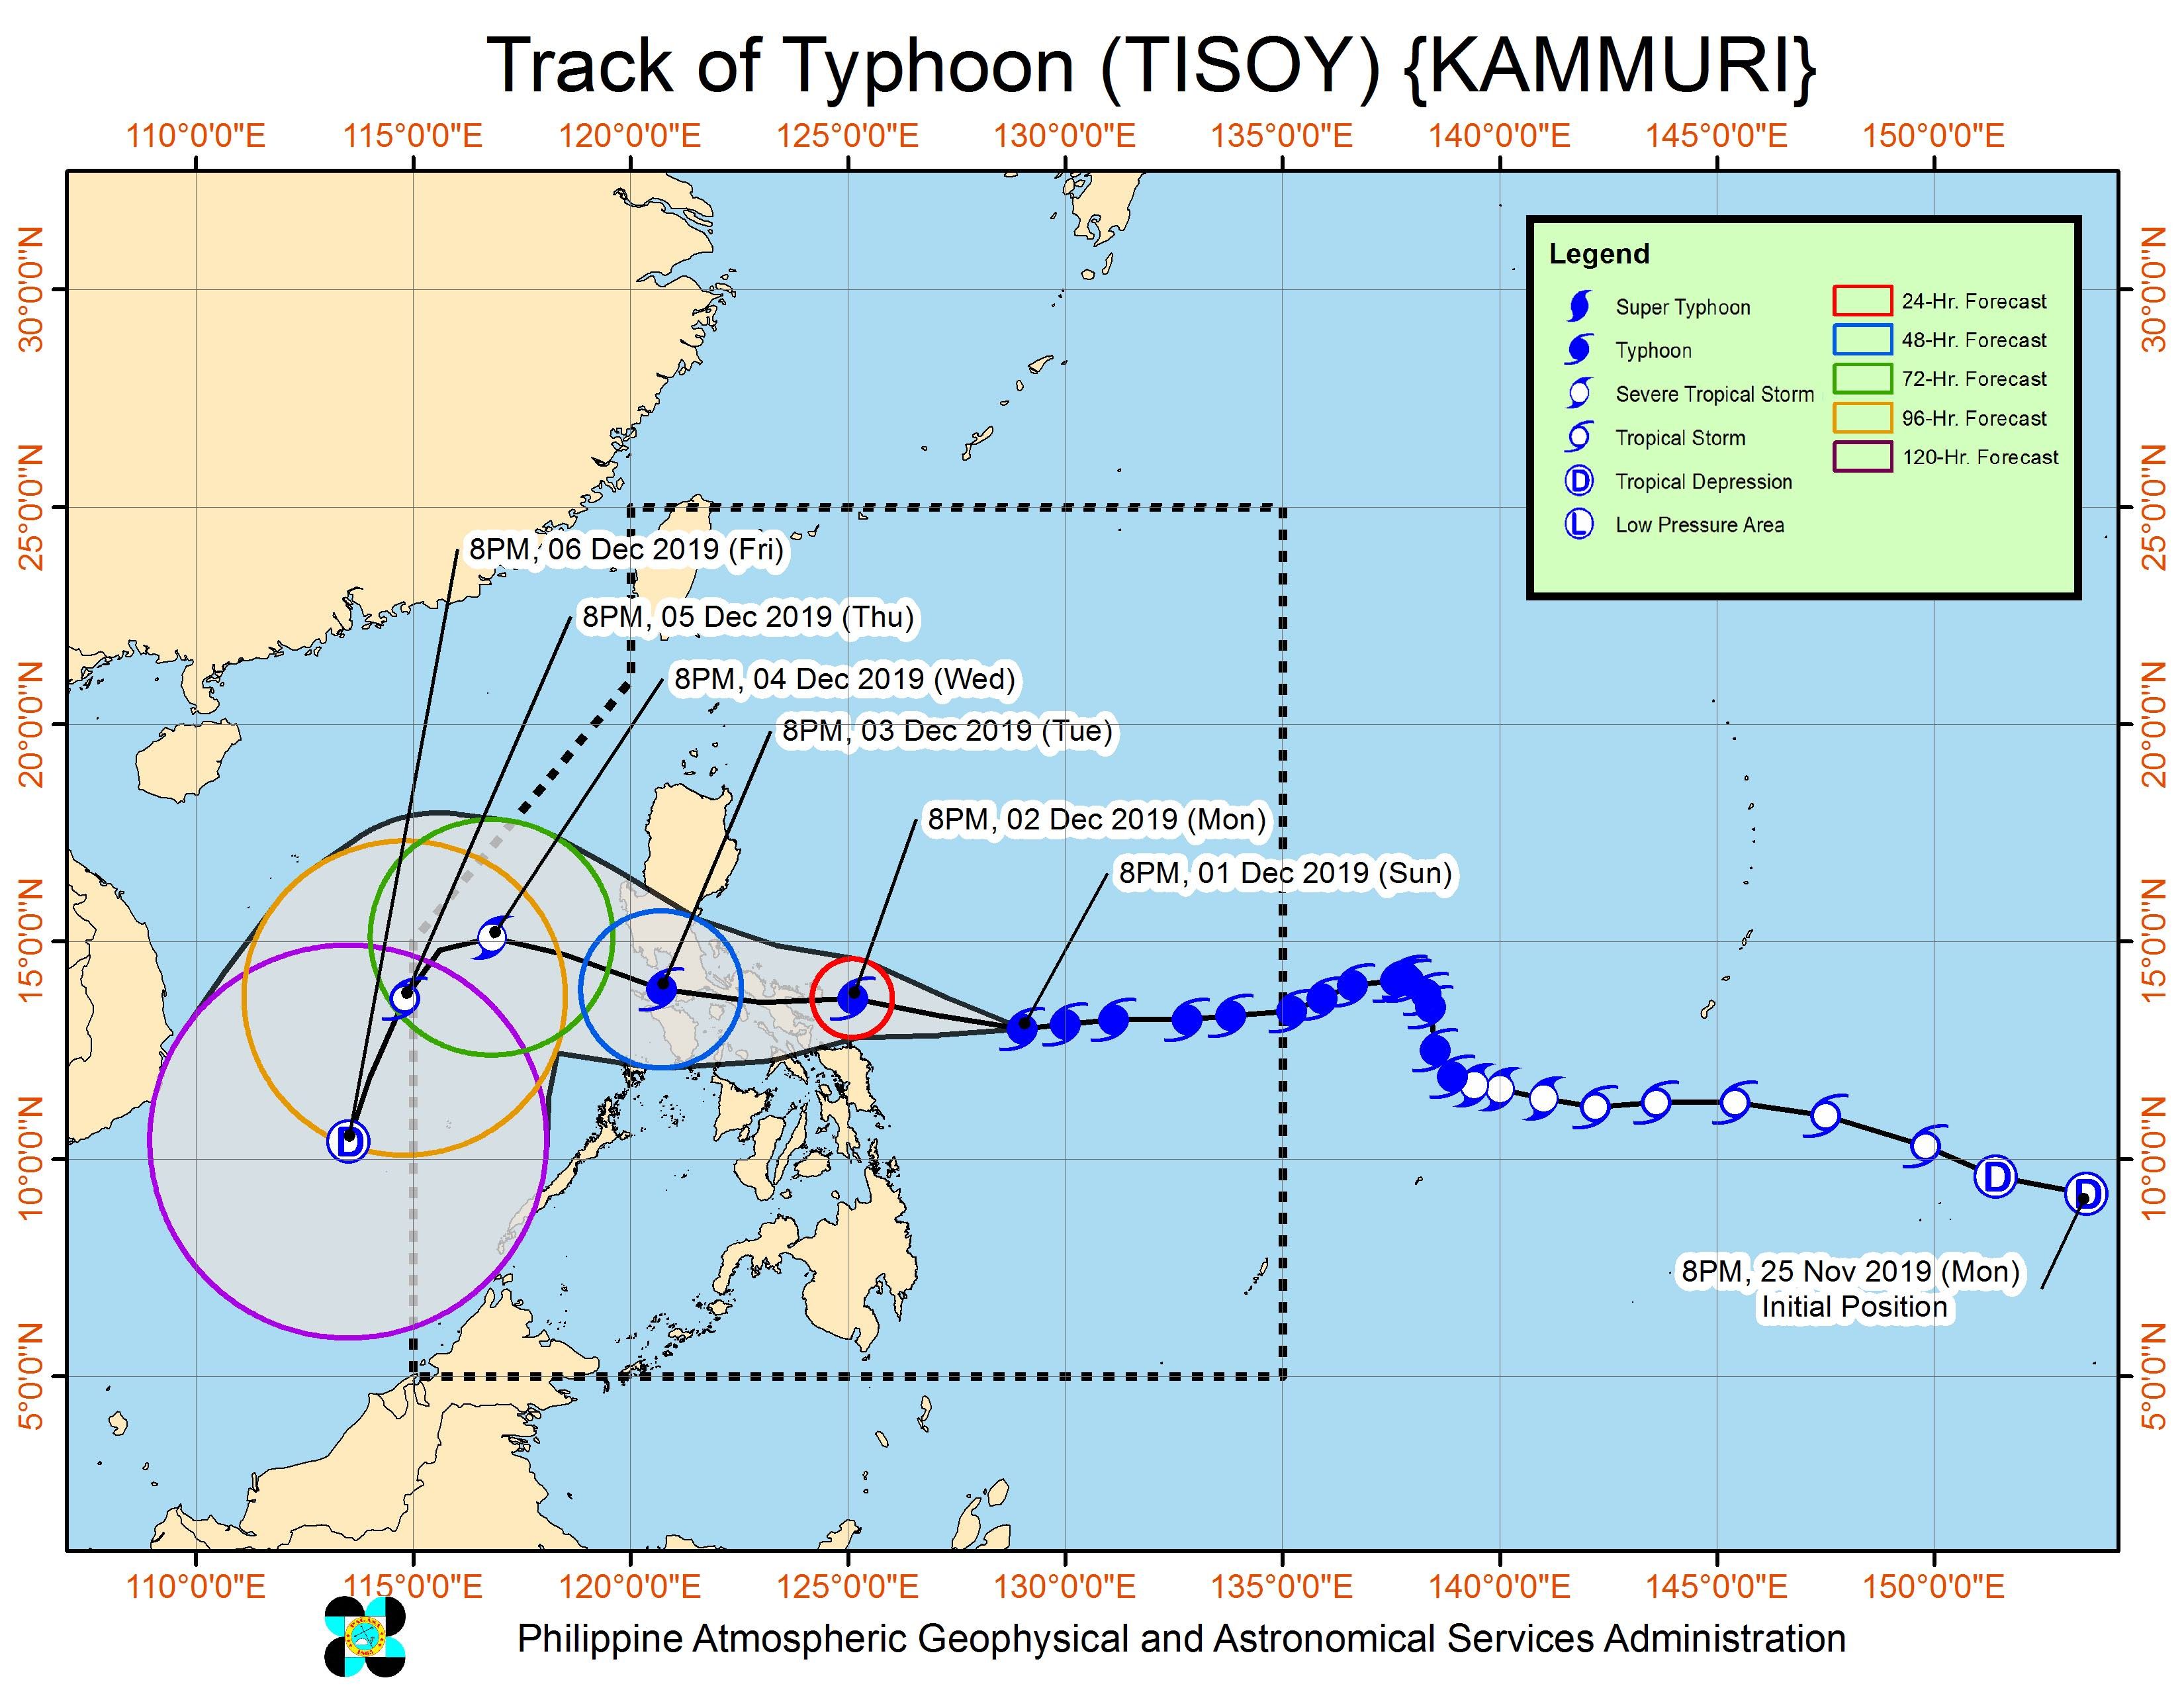 Forecast track of Typhoon Tisoy (Kammuri) as of December 1, 2019, 11 pm. Image from PAGASA 